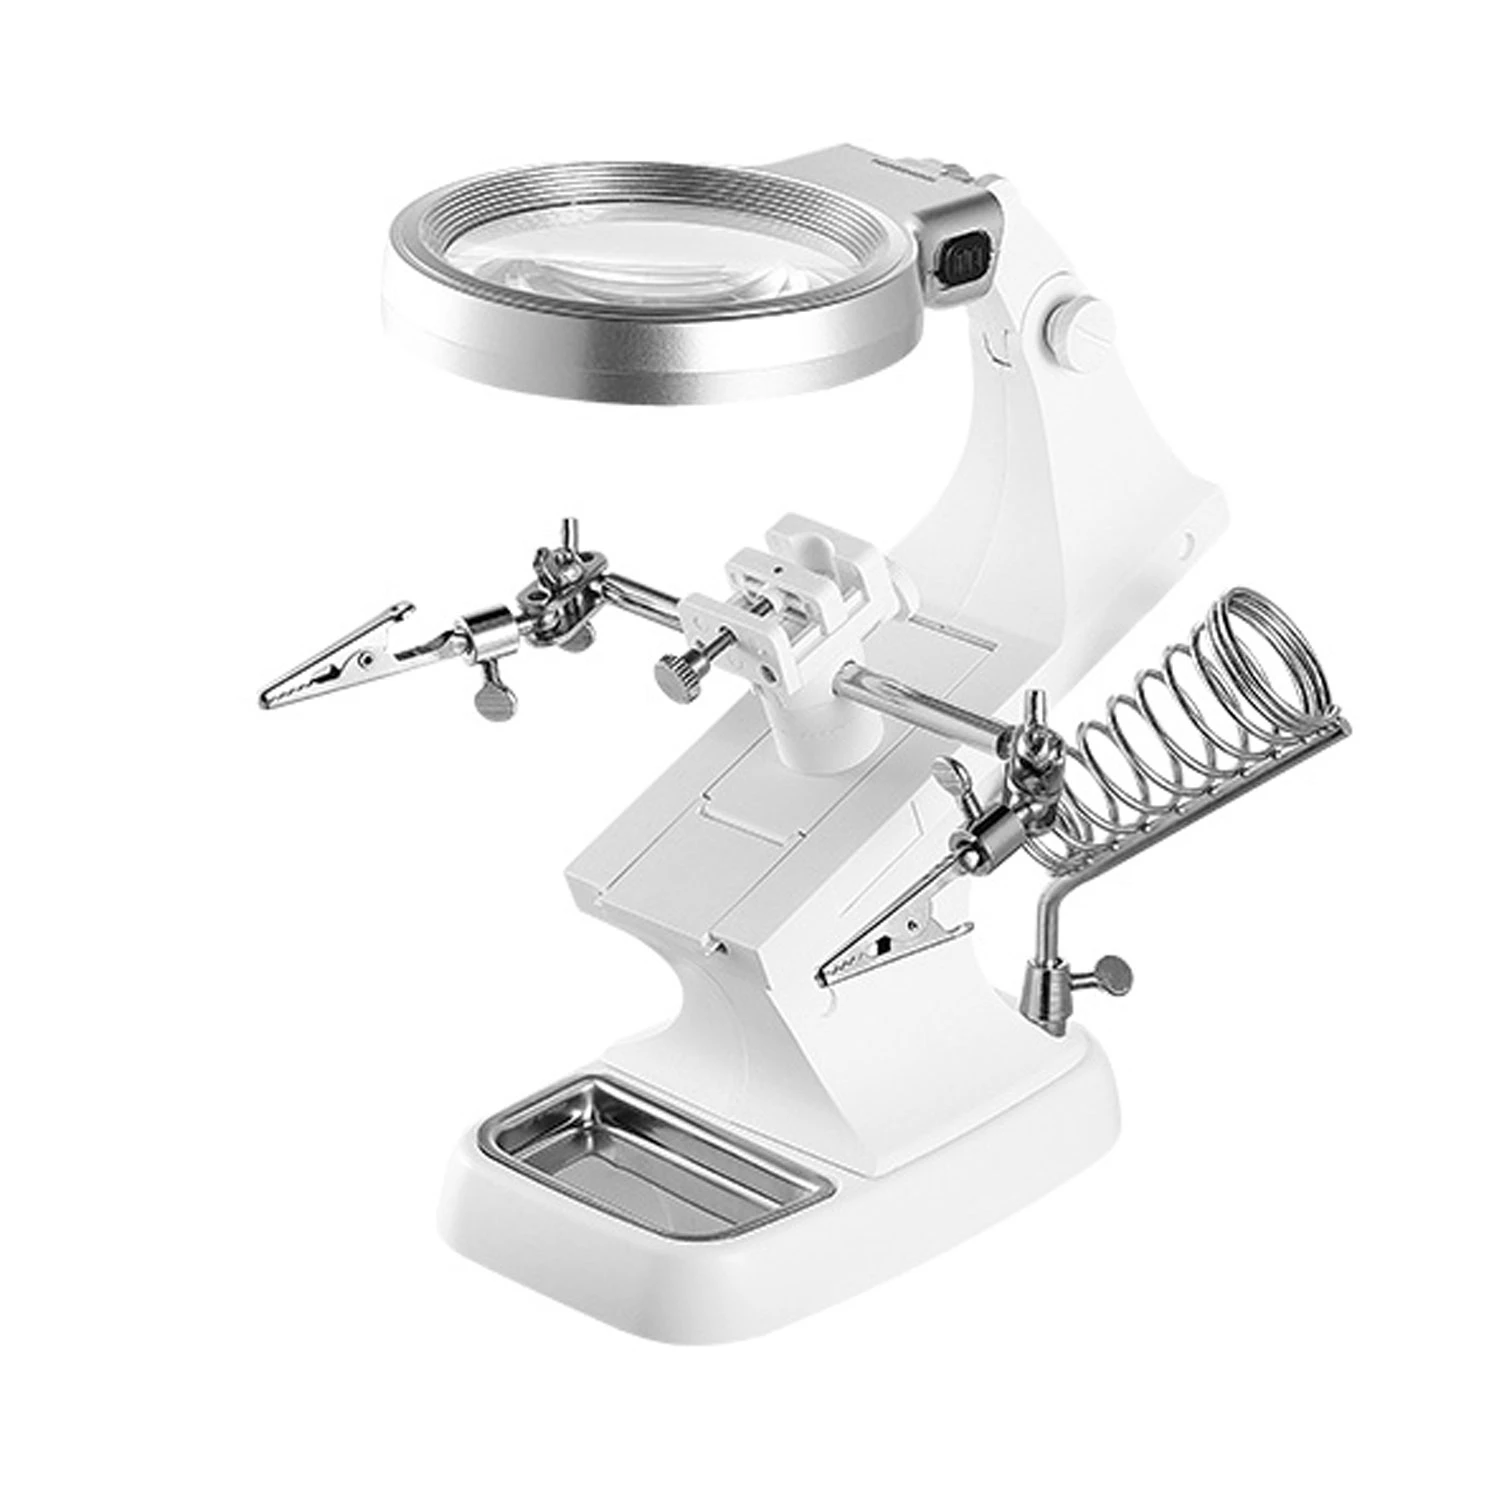 LED Light Helping Hands Magnifying Glass 3X/4.5X w/ 360°Adjust Third Hand Soldering Vise